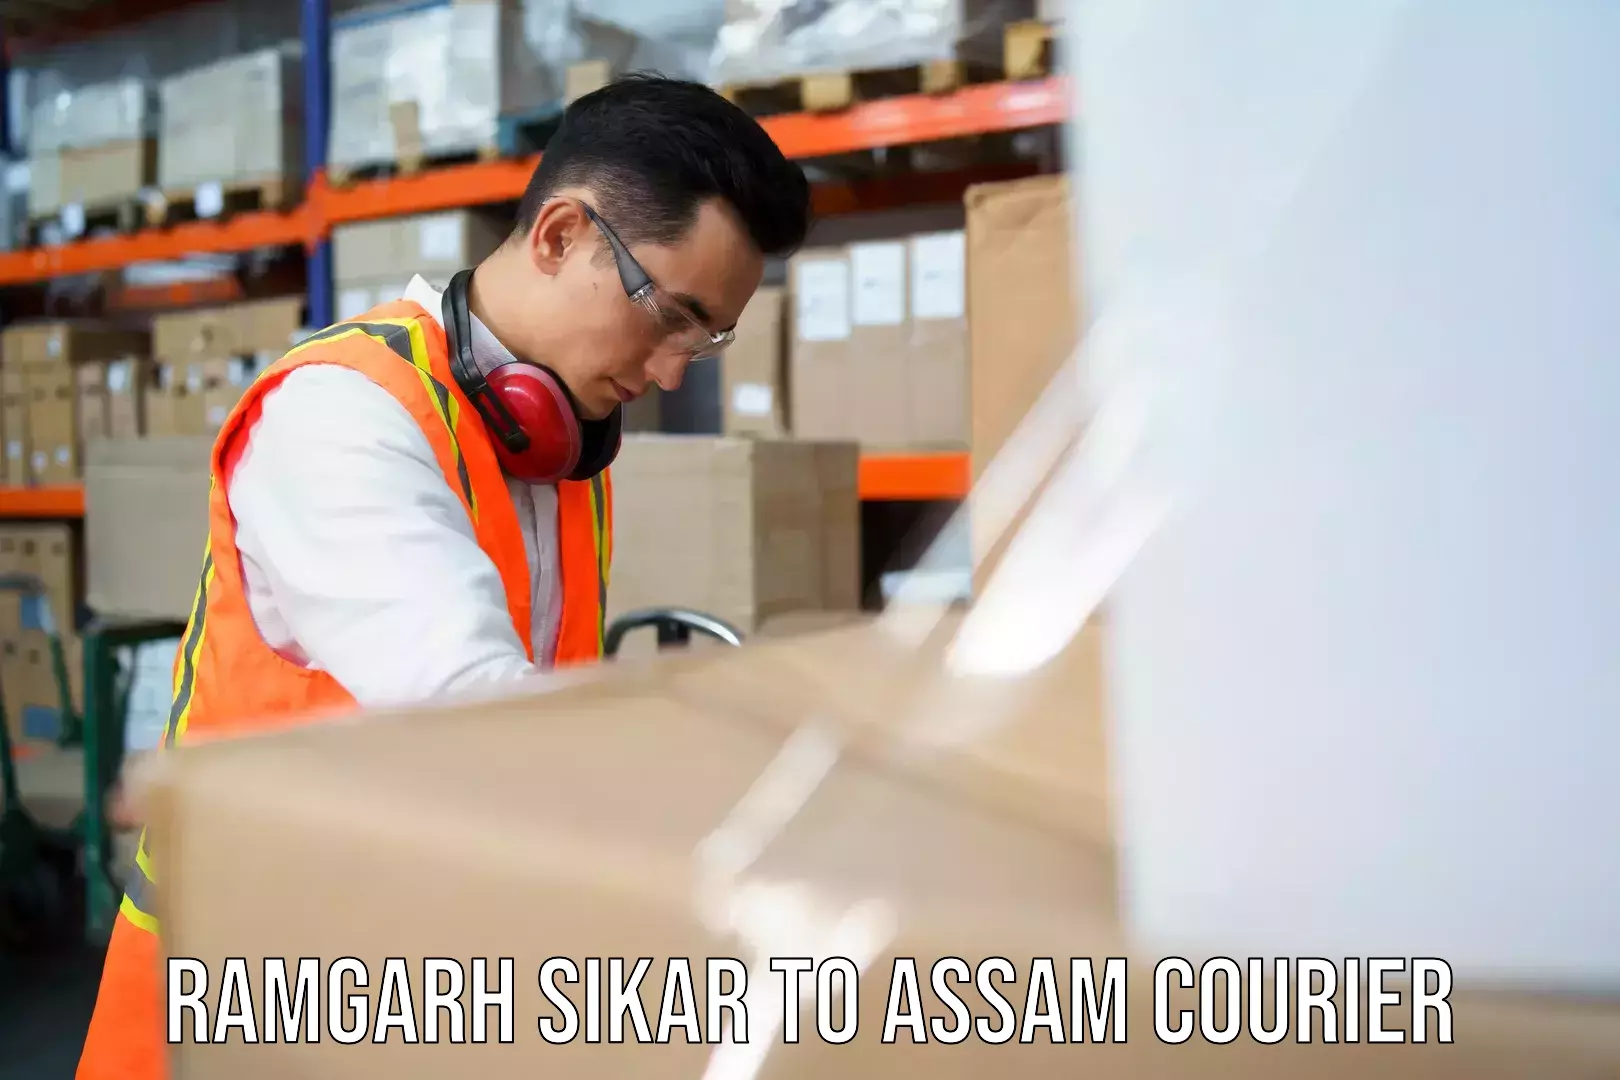 Same-day delivery options Ramgarh Sikar to Assam